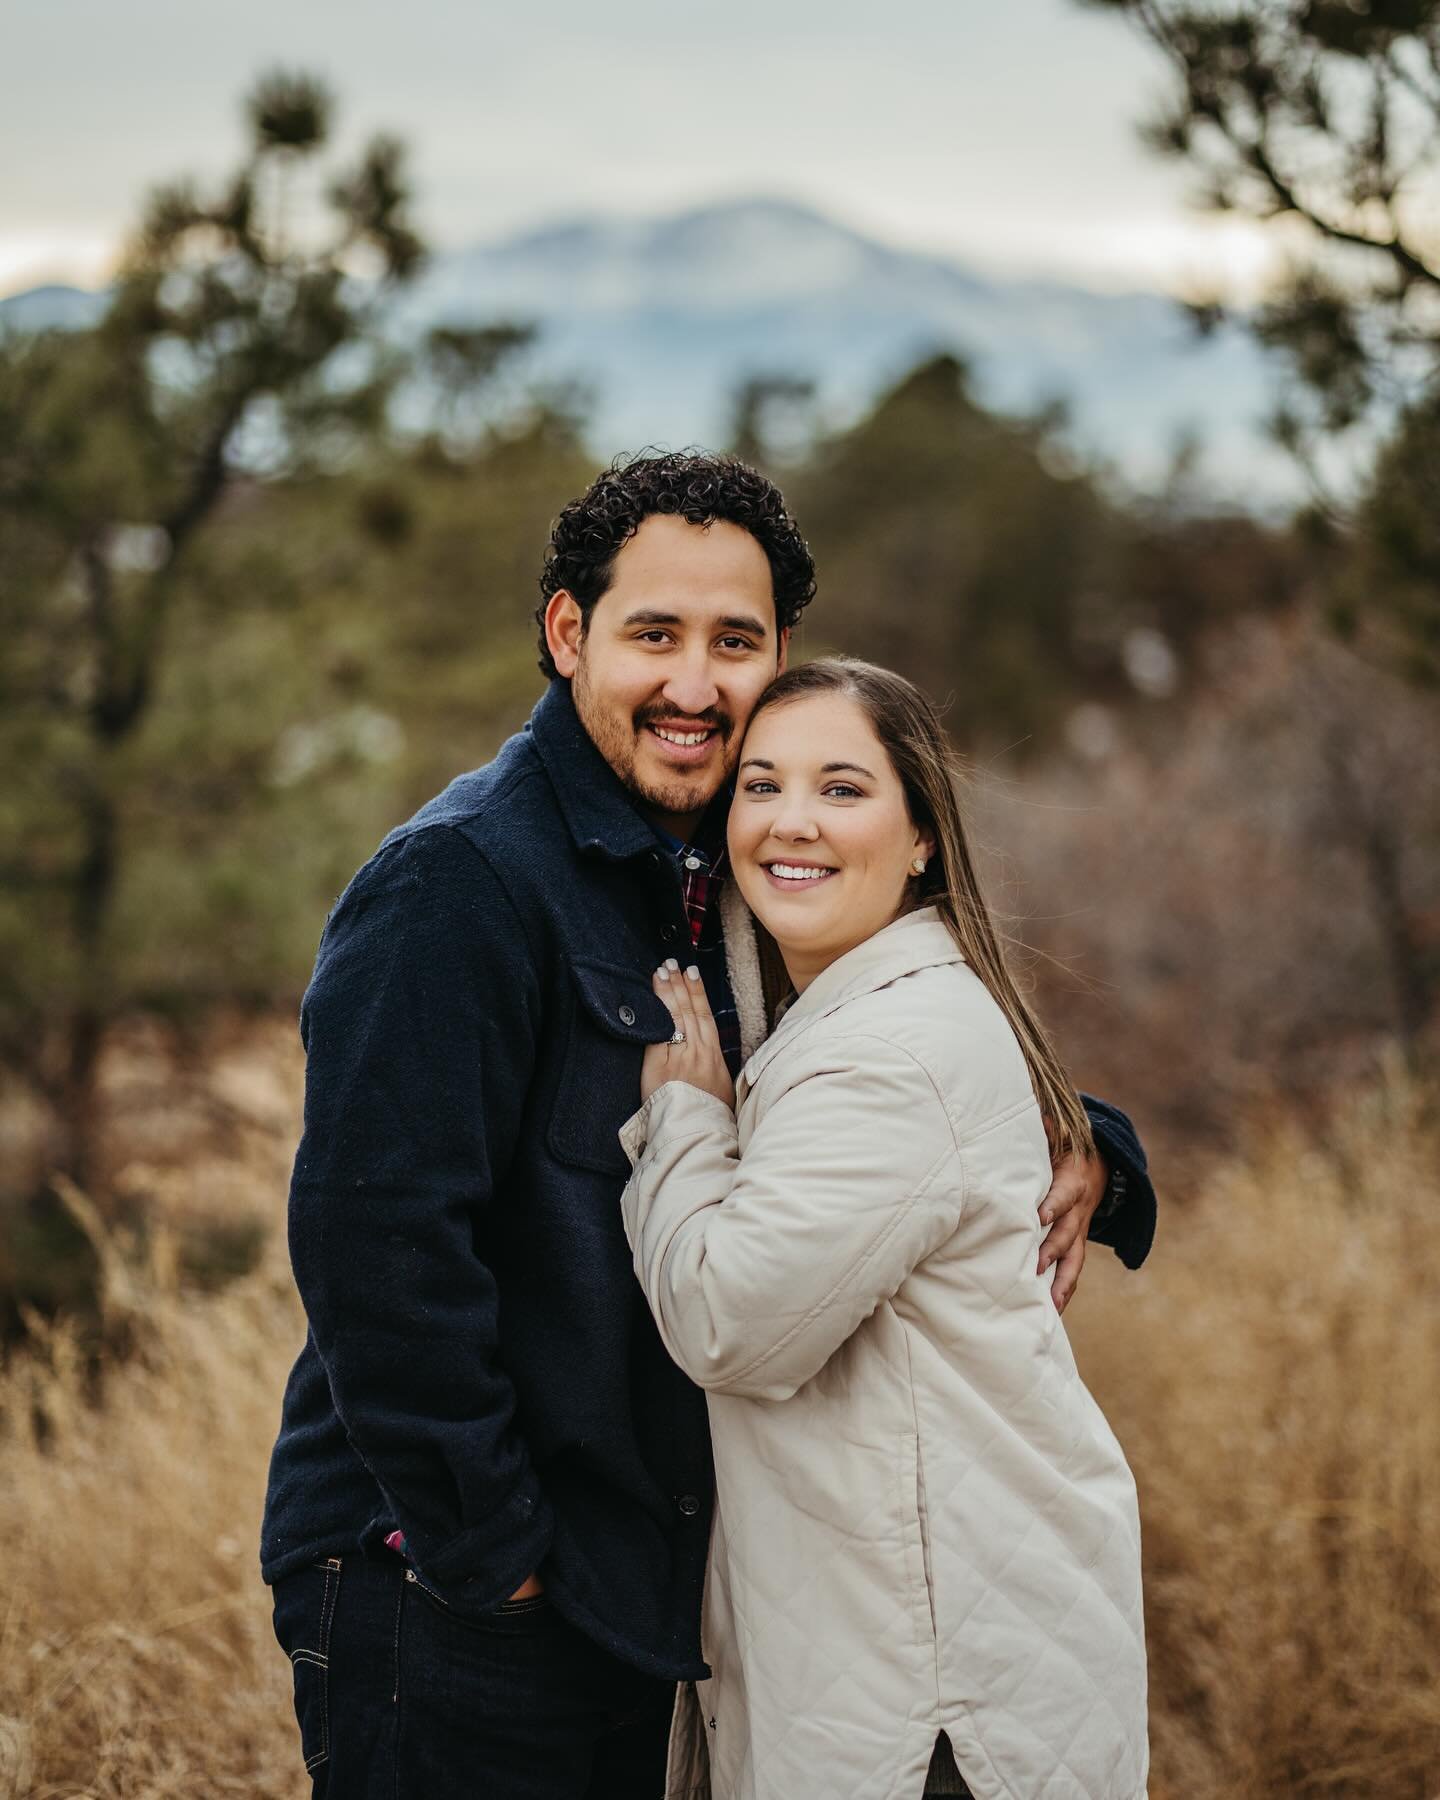 Vacationing in CO definitely calls for a photoshoot!

Kendall + Rodrigo got the memo 🫶
.
.
📸: Nate
.
.
#coloradospringsphotographer #coloradospringsphotography #coloradospringsportraitphotographer